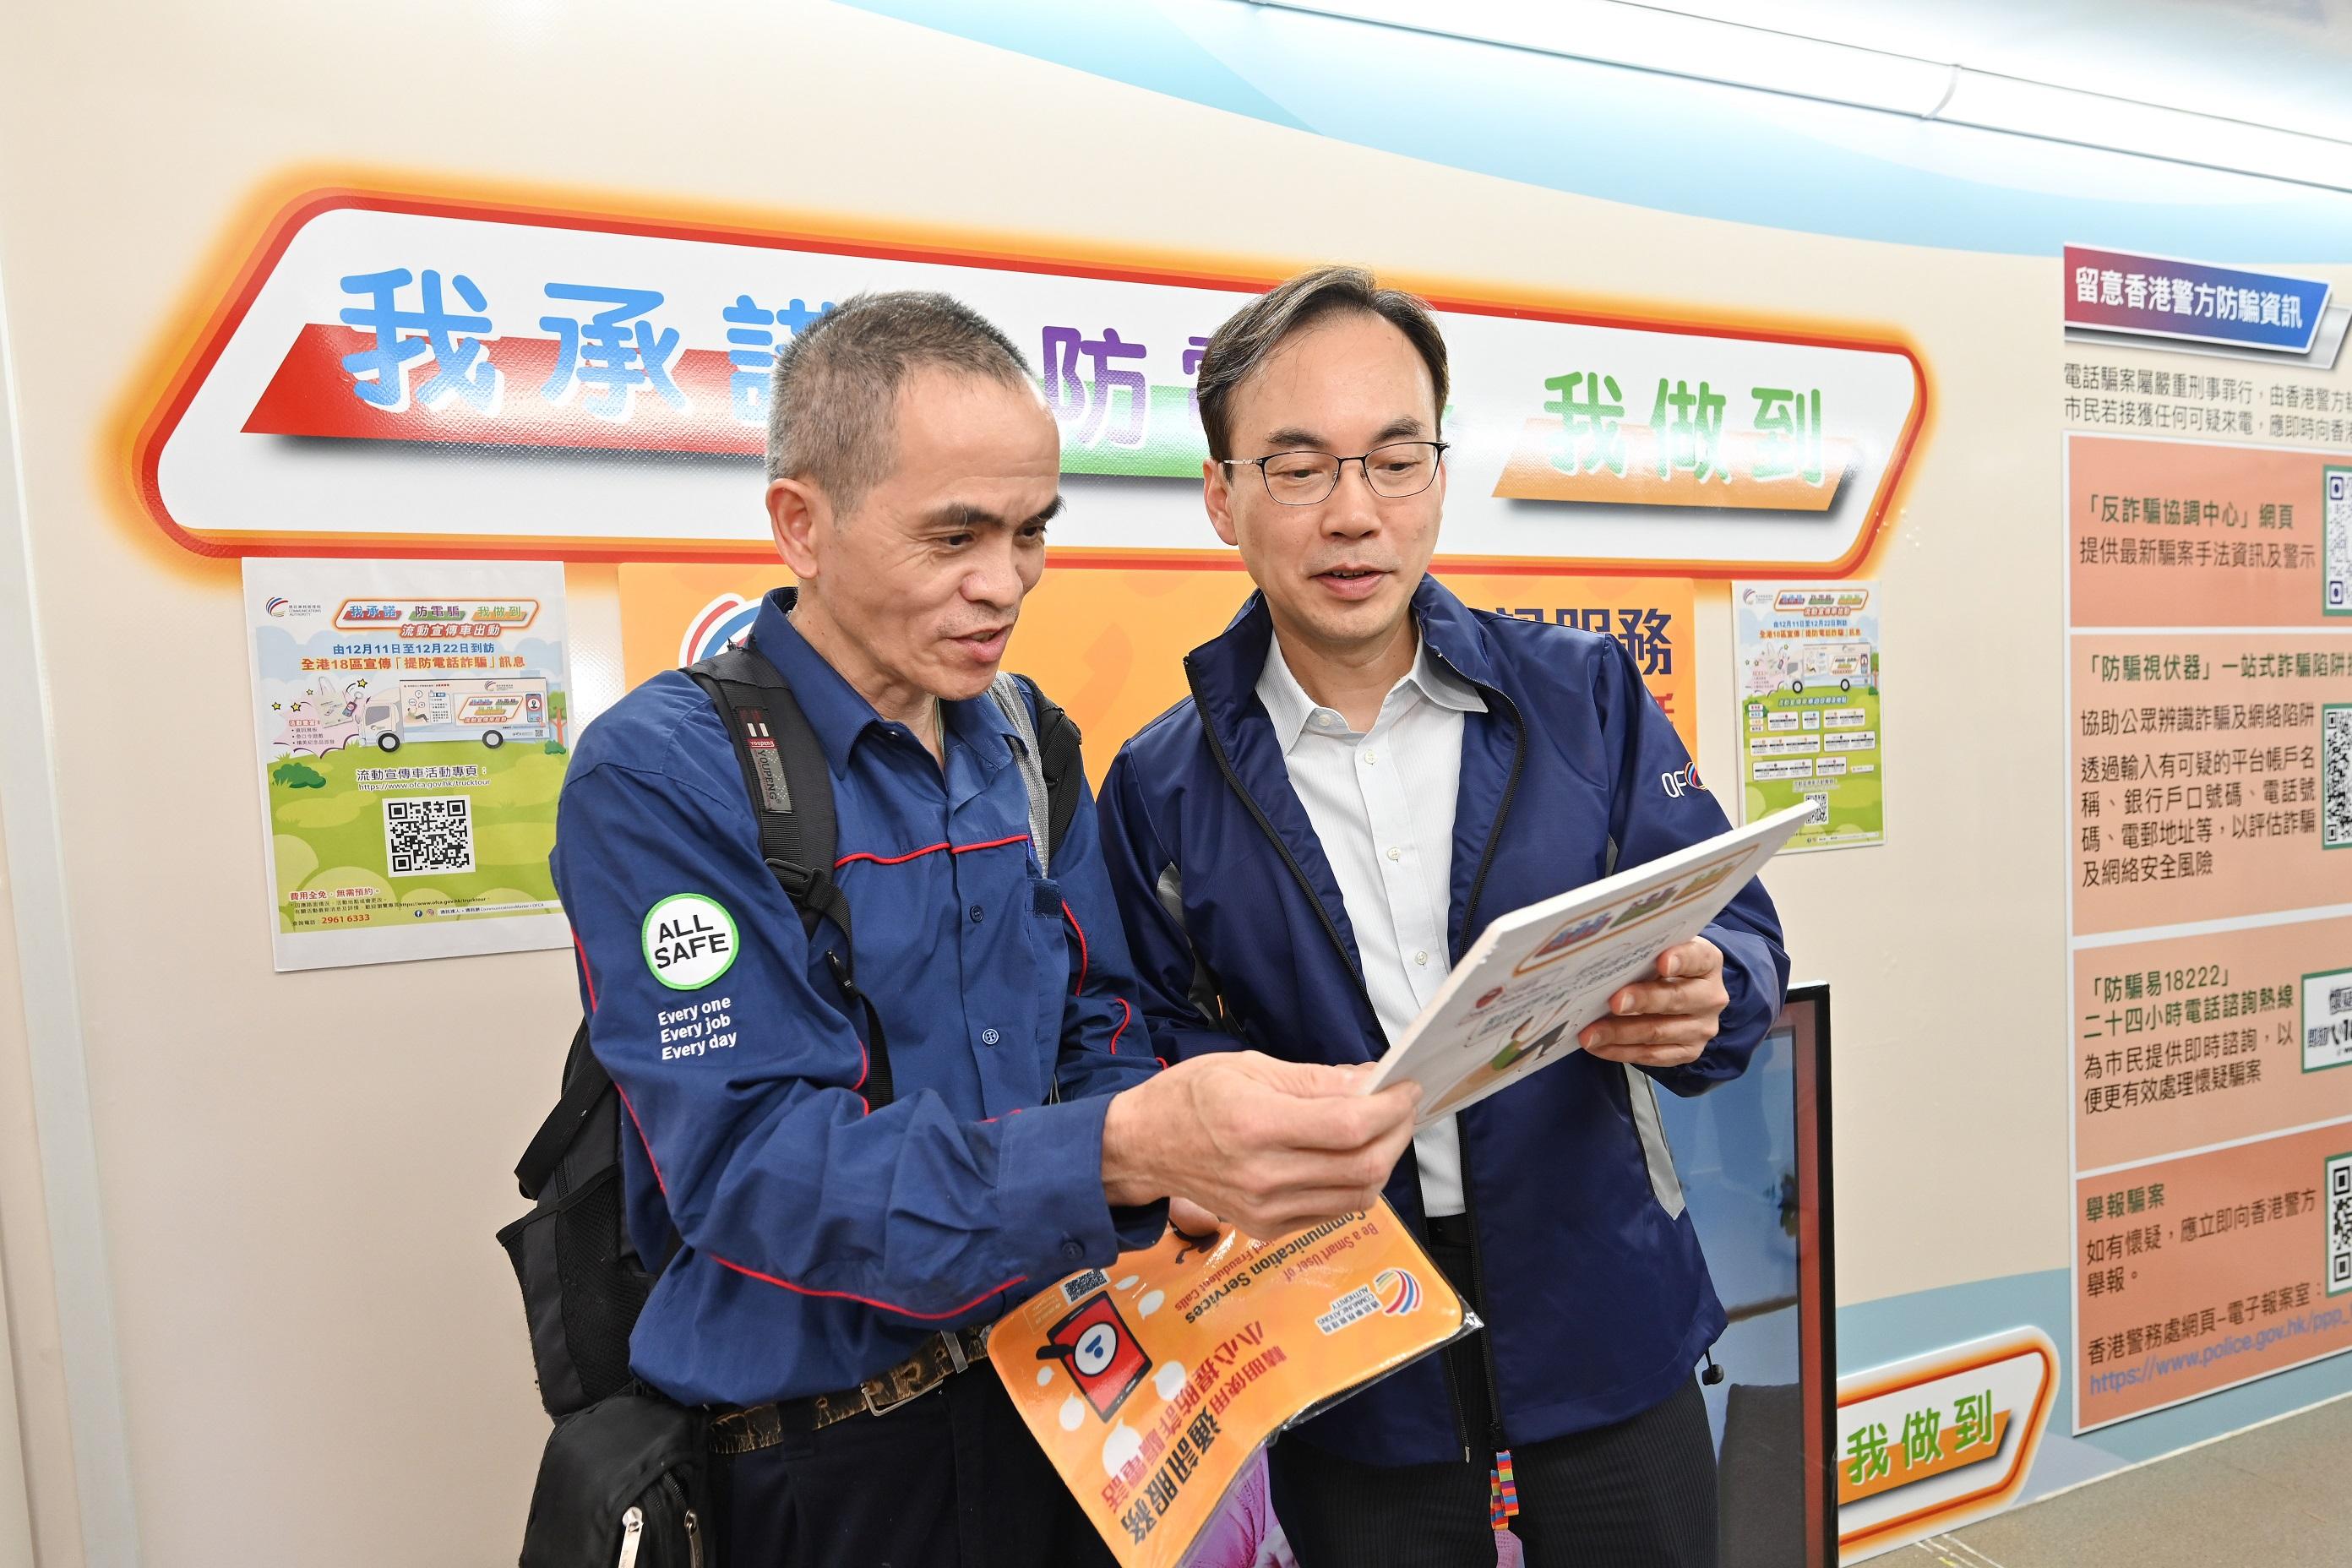 The Communications Authority today (December 11) launched a promotion truck tour campaign themed "My Promise against Phone Scams" to enhance publicity against telephone scams. Photo shows the Director-General of Communications, Mr Chaucer Leung (right), visiting the promotion truck and joining a visitor at the tongue twister game.